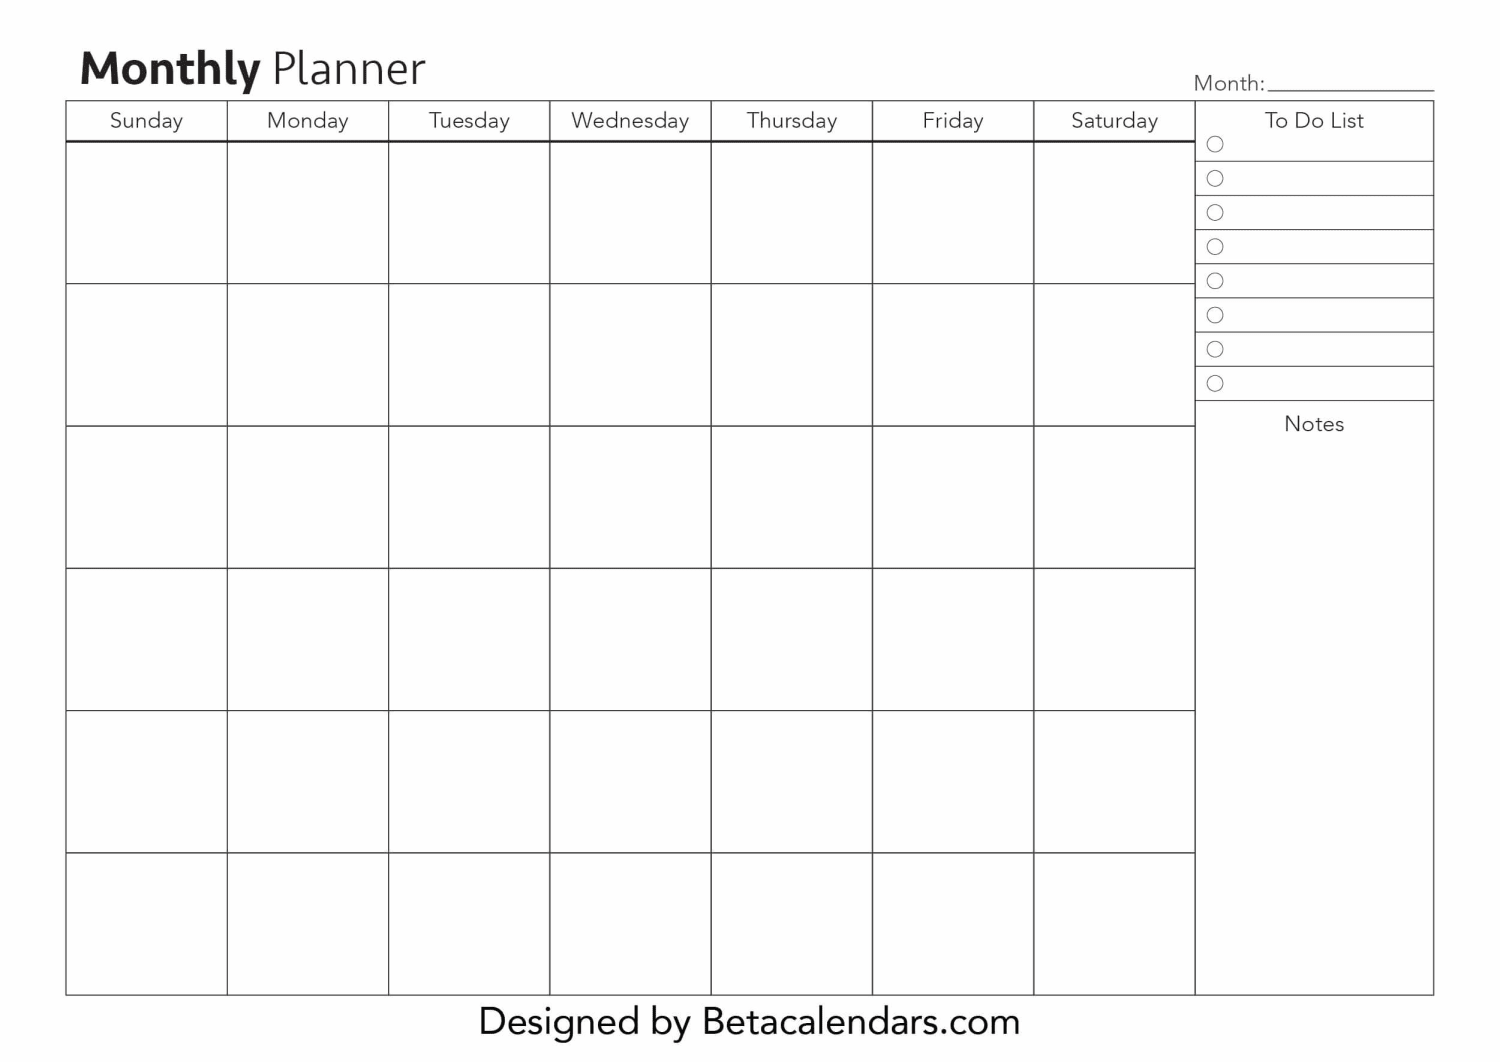 Monthly planner | free blank printable monthly planners